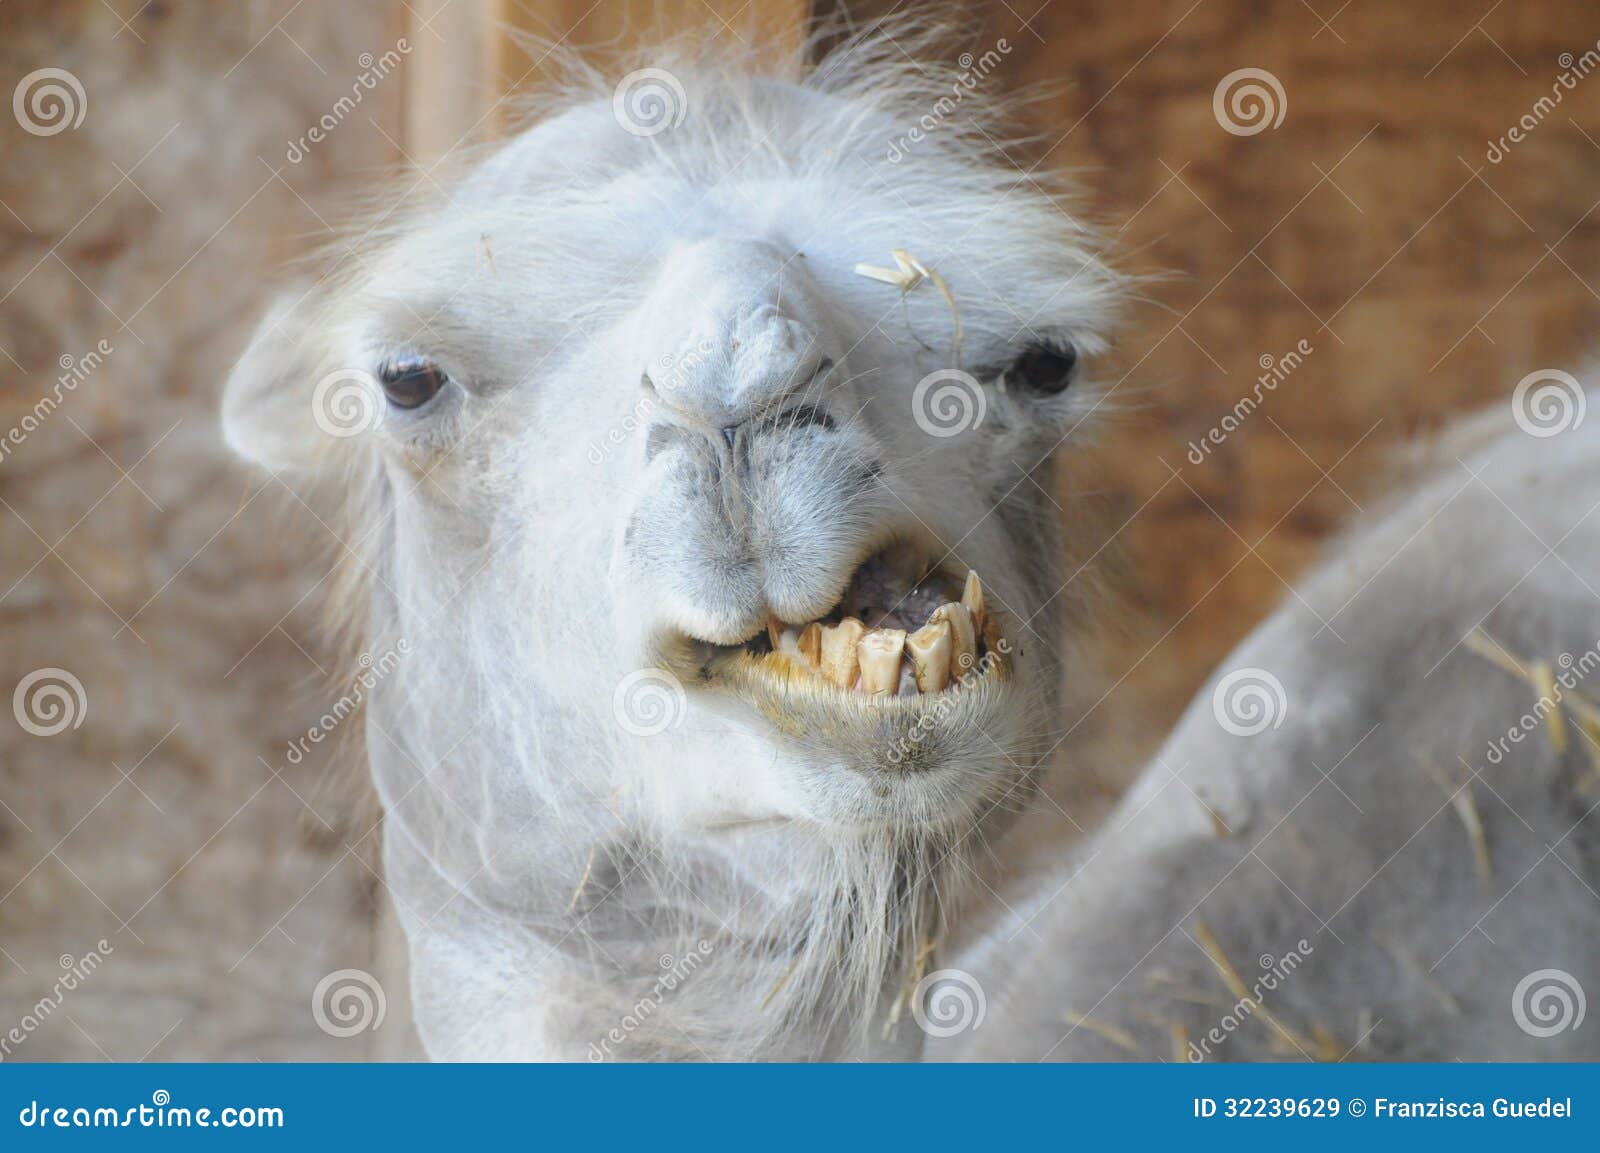 Funny Camel With Bad Teeth Royalty Free Stock Images   Image: 32239629